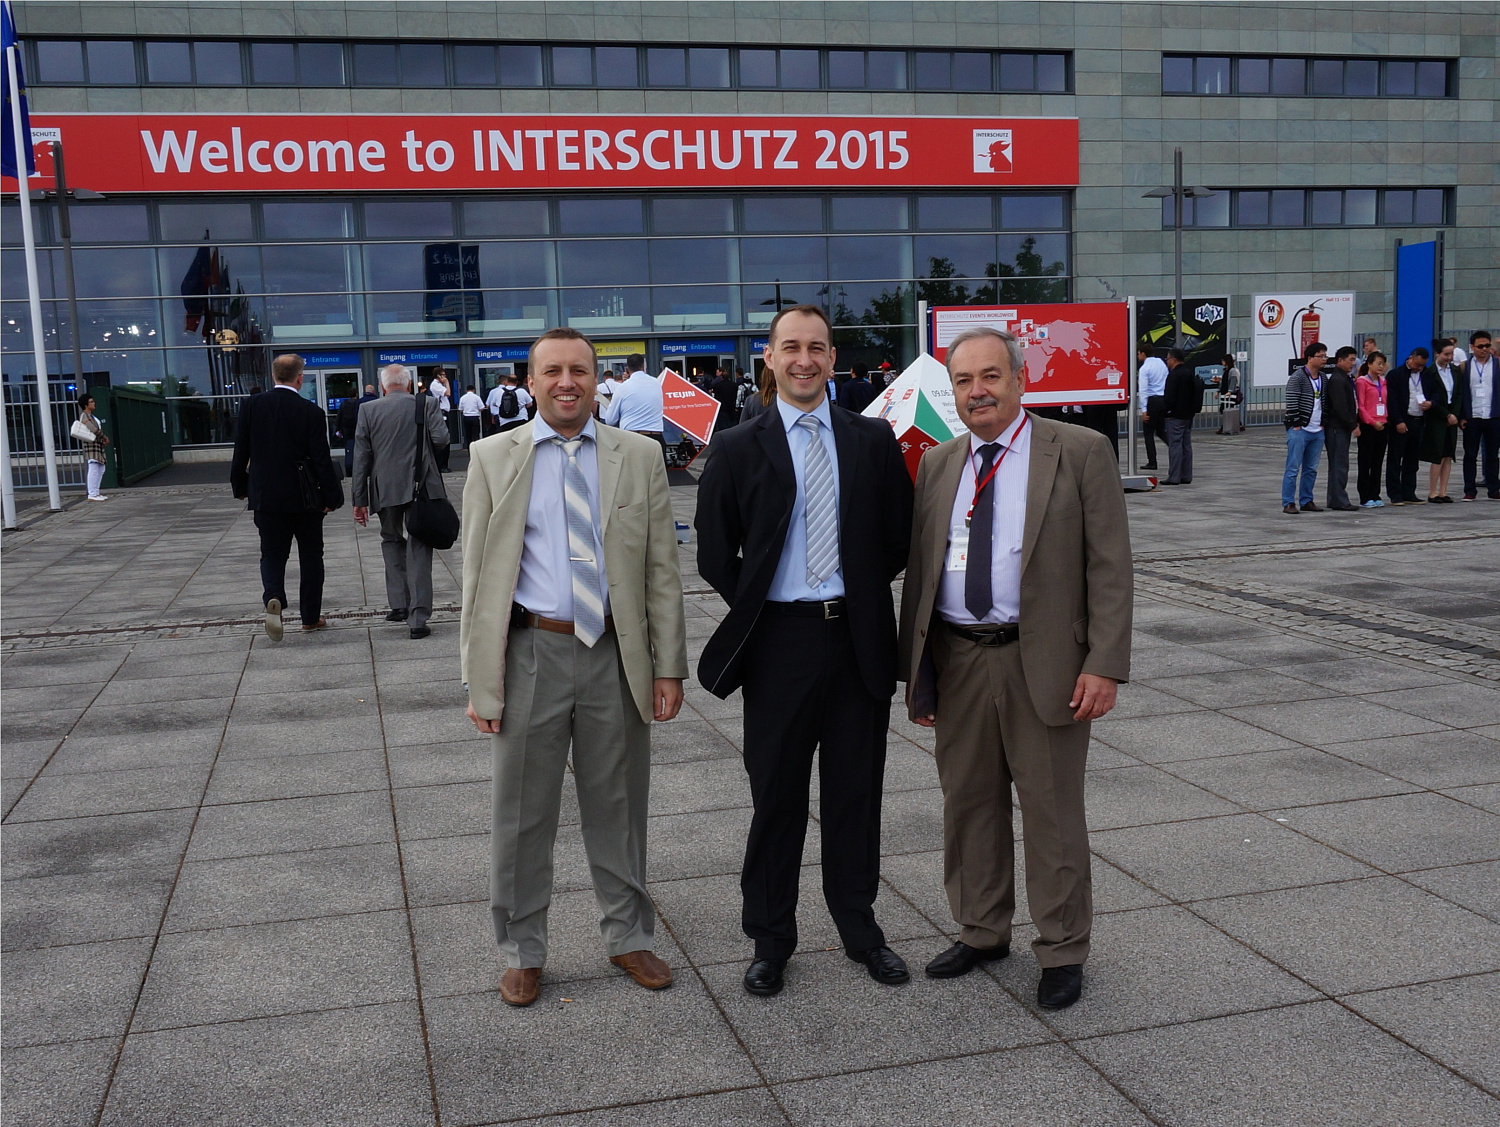 Official opening ceremony of the International exhibition Interschutz-2015